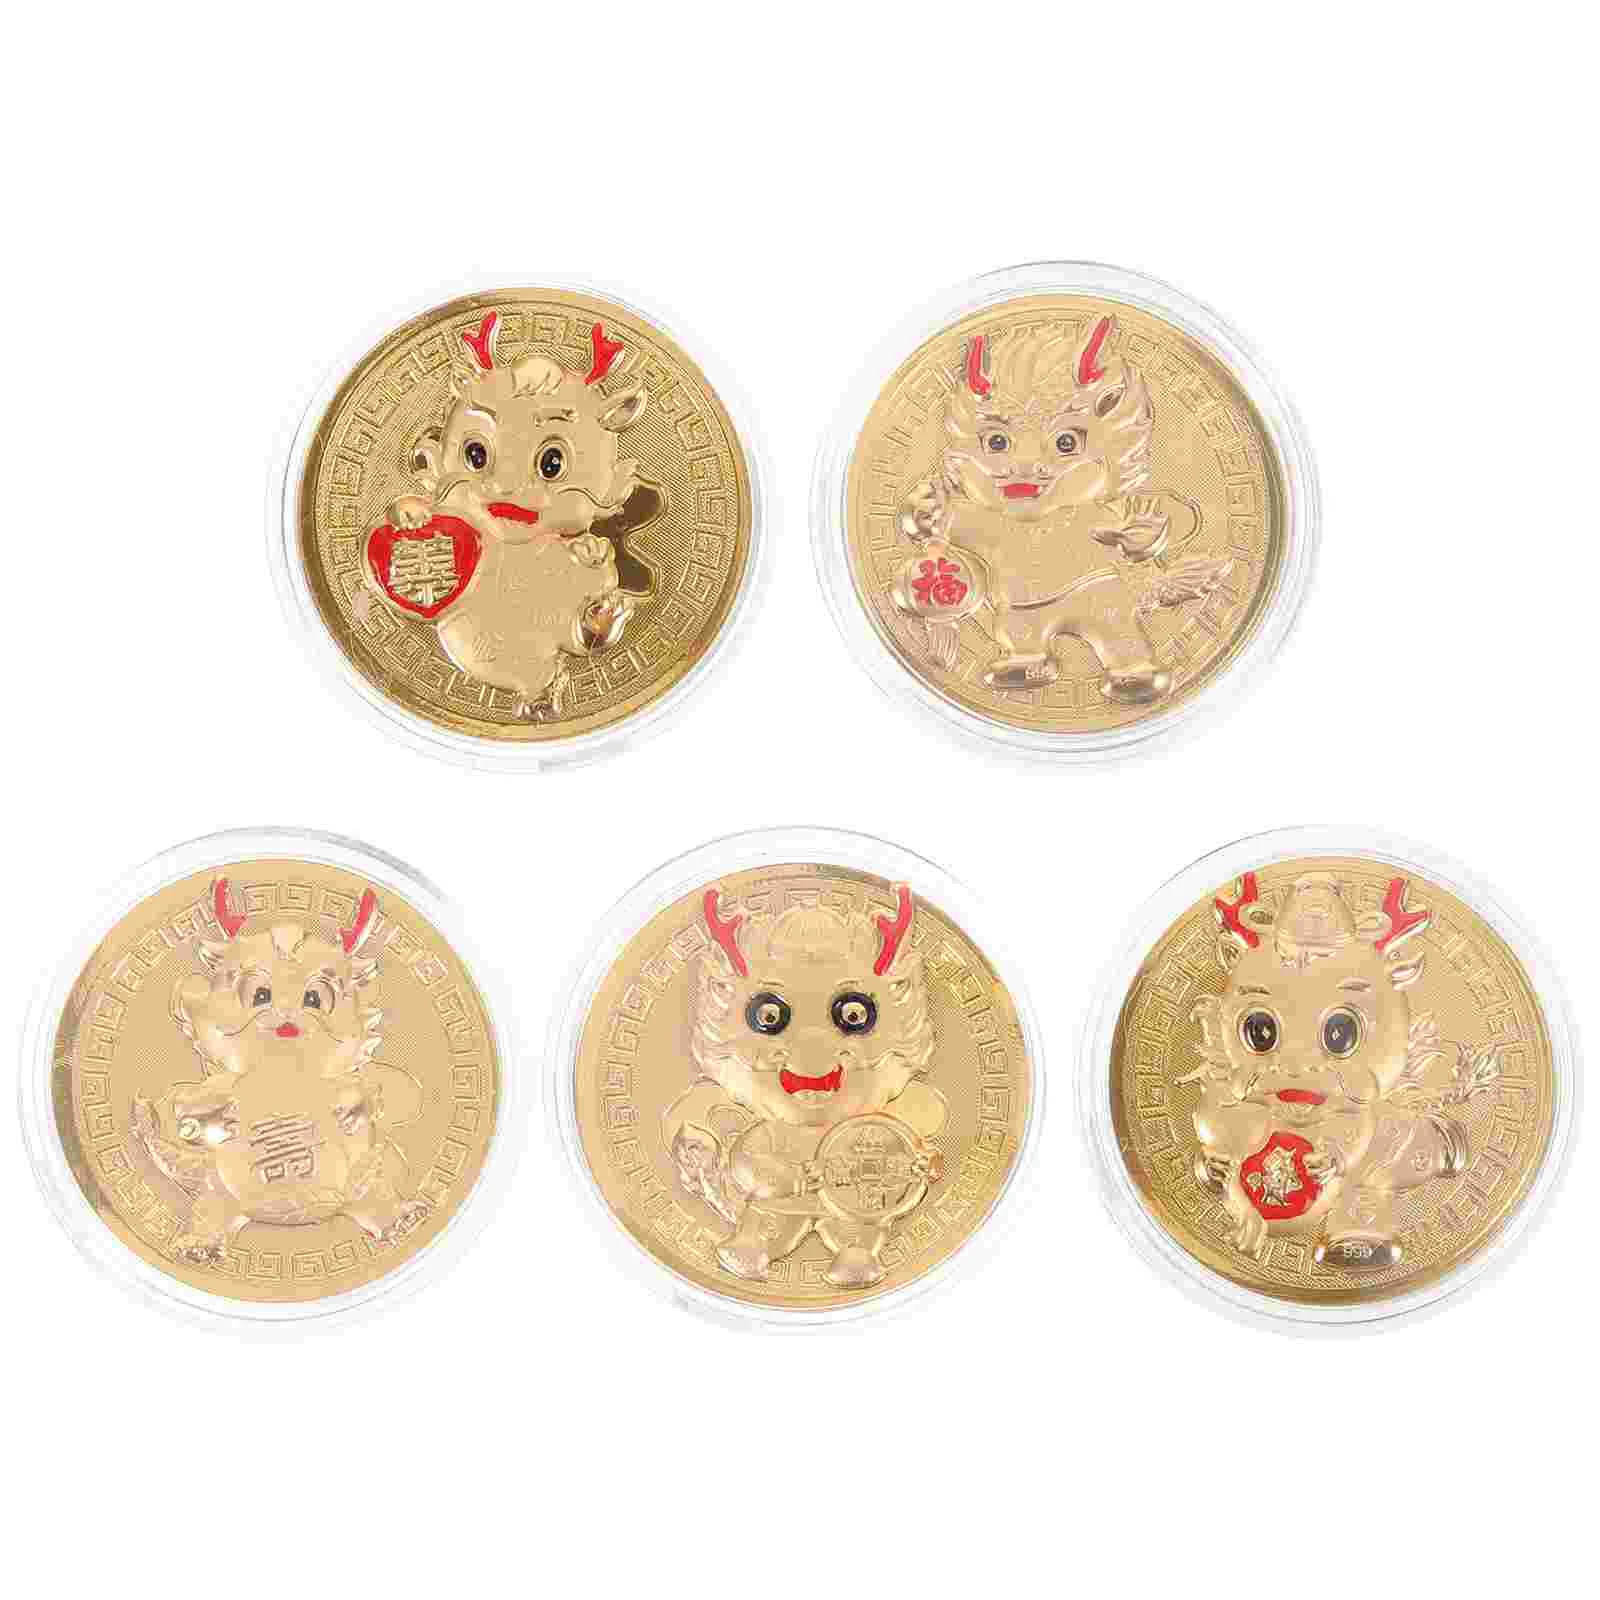 

Dragon Coin Decor Commemorative Coins Collecting Collection Zodiac Chinese New Year Gifts Souvenir